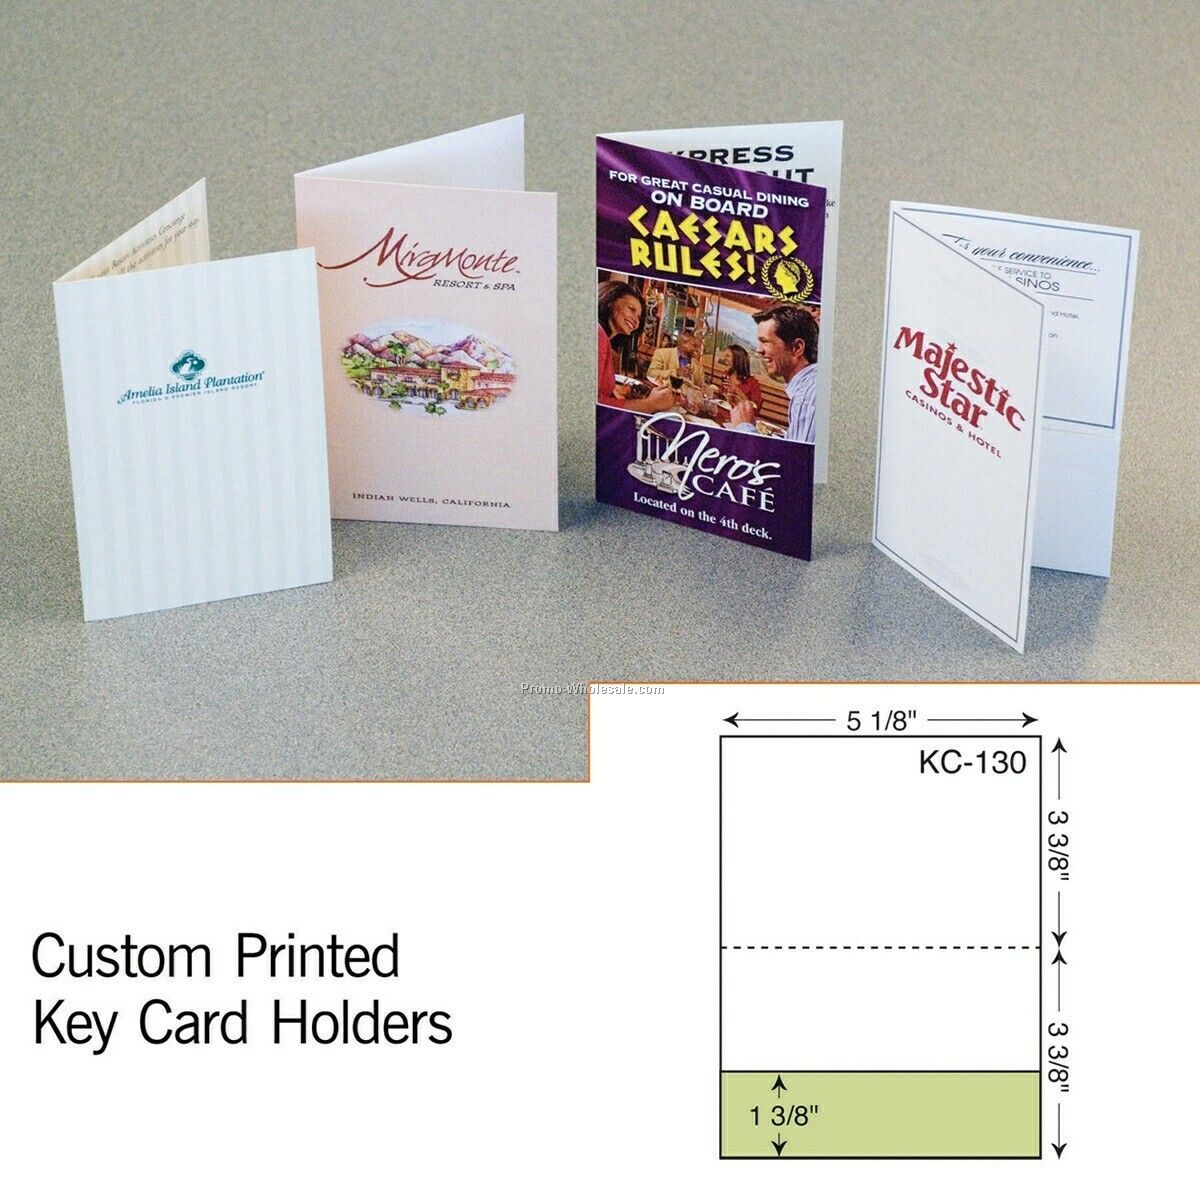 2-3/4"x4-1/2" Key Card W/ Curved Right Pocket (4 Color Process)